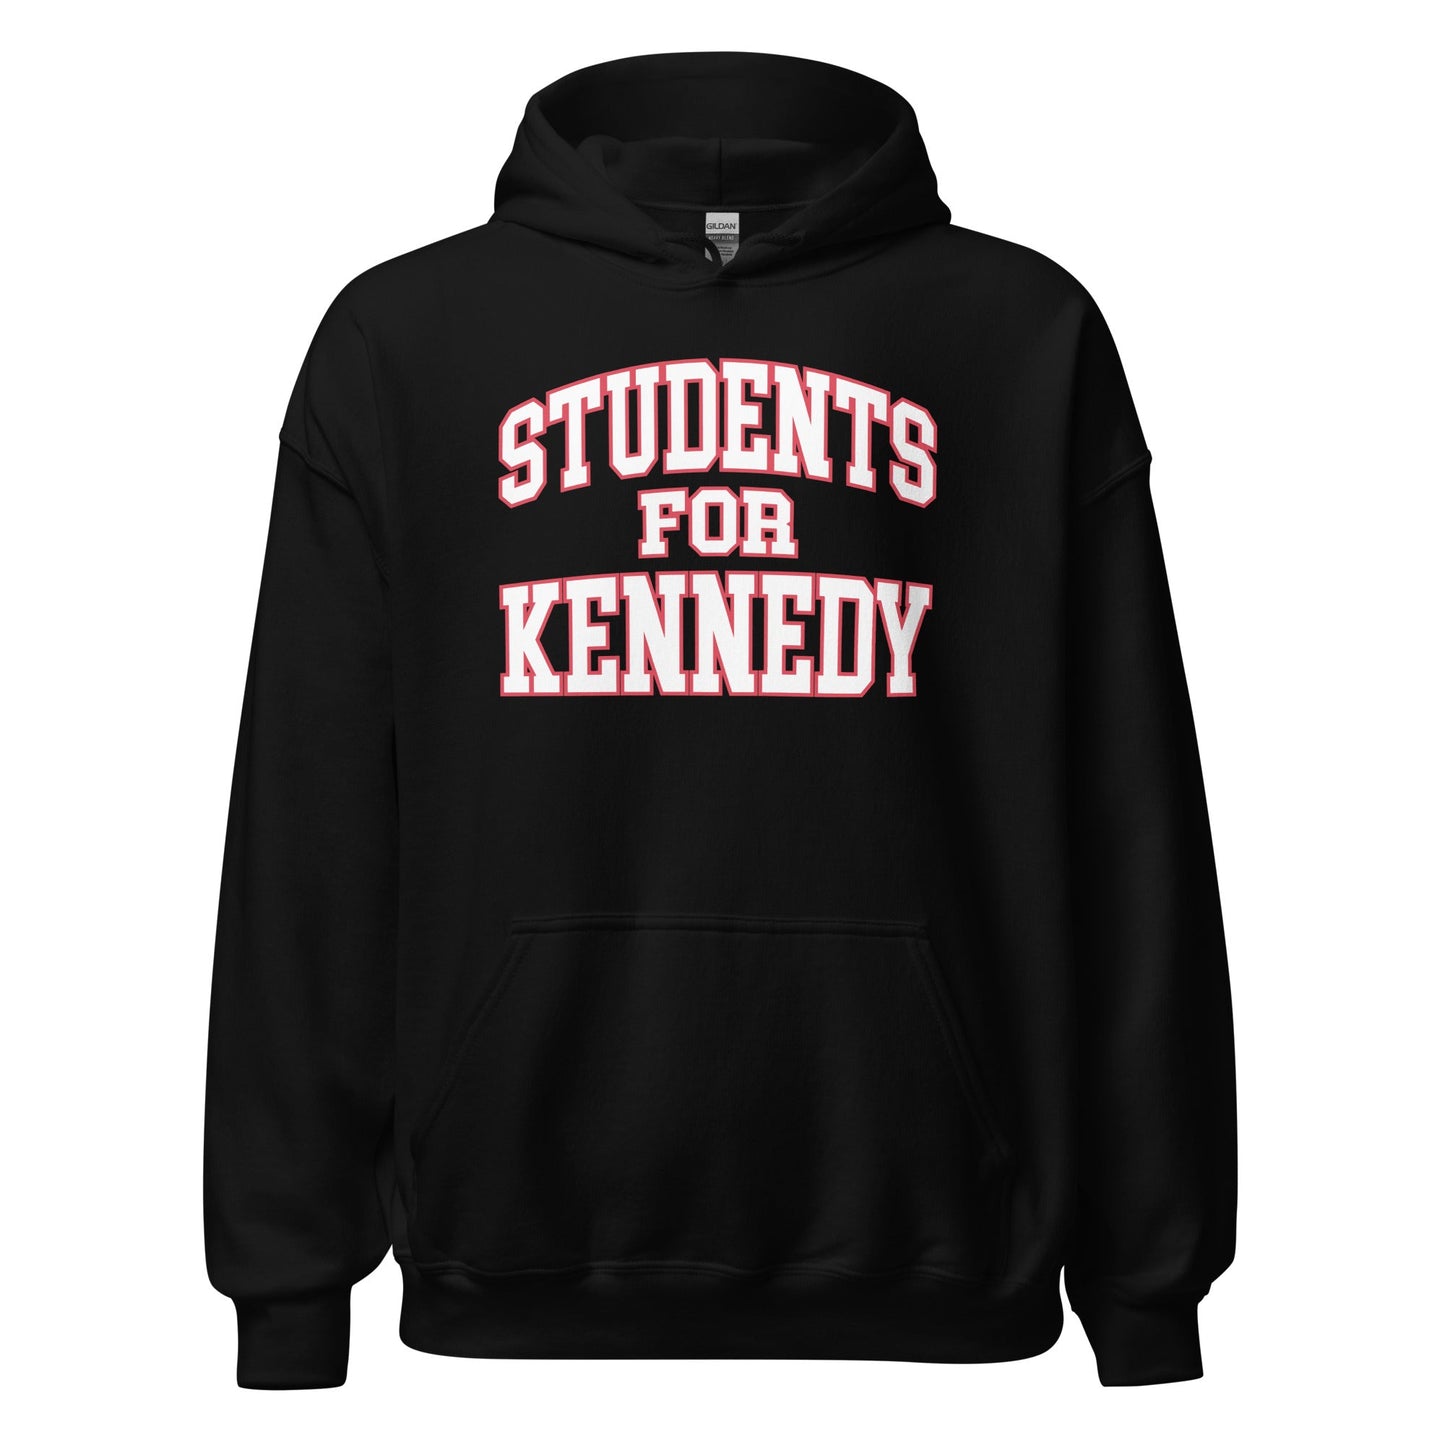 Students for Kennedy Unisex Hoodie - TEAM KENNEDY. All rights reserved